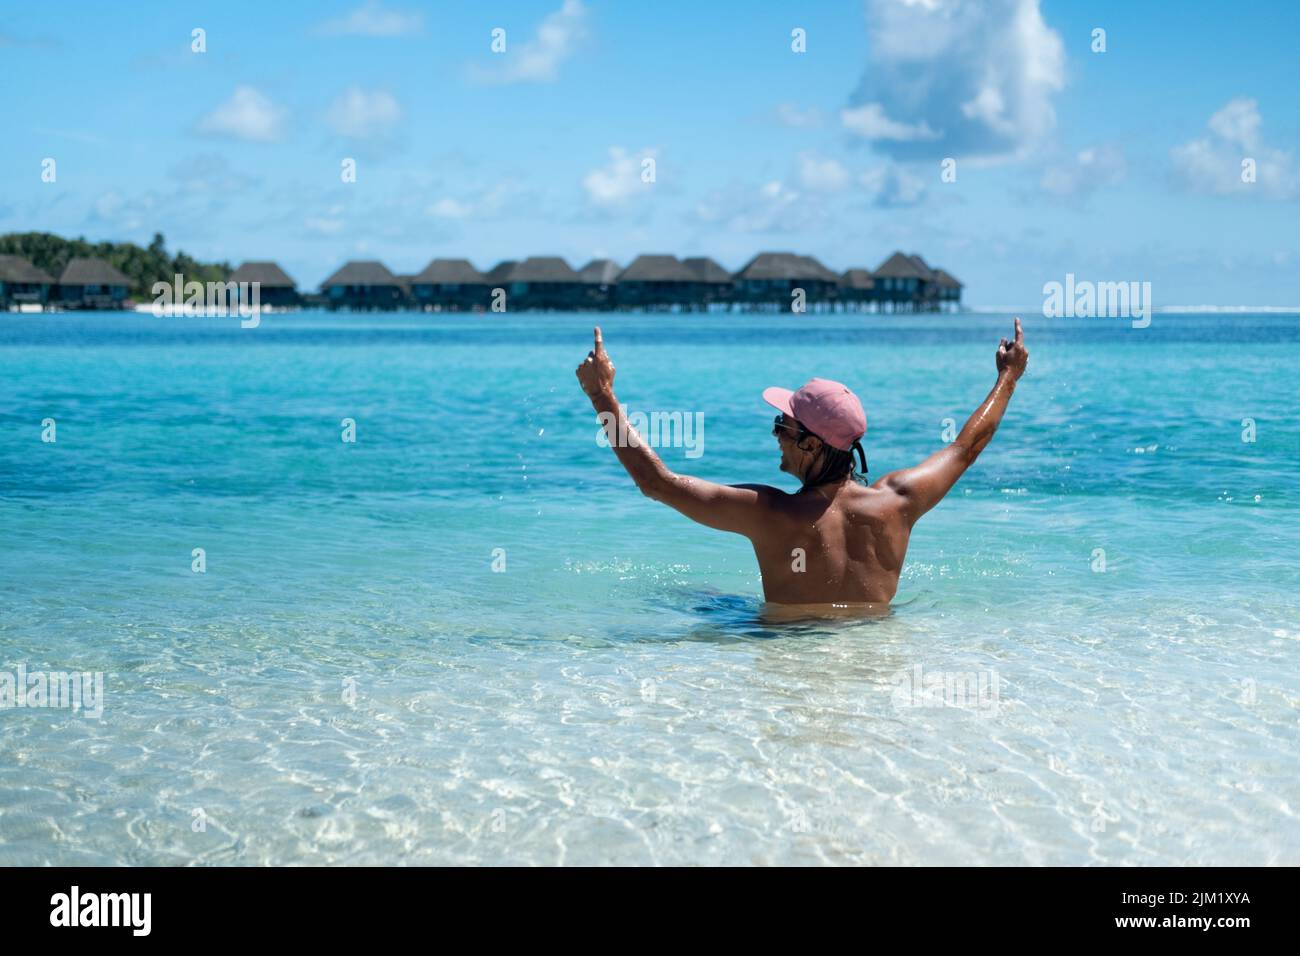 A man sits on the beach with amazing ocean views. Maldives Stock Photo